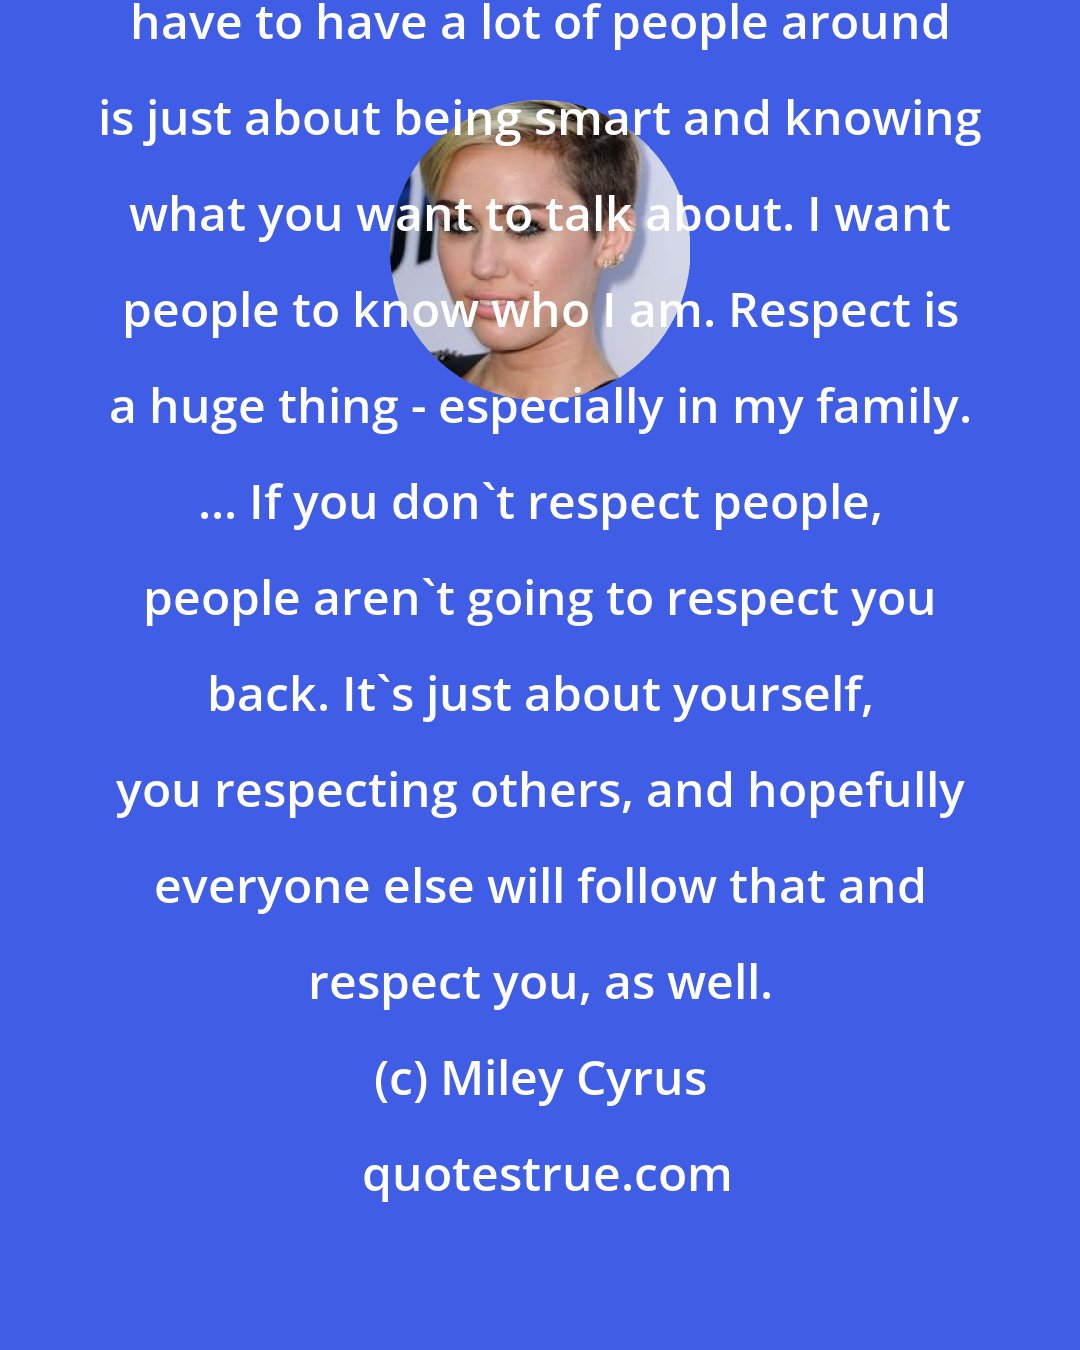 Miley Cyrus: I think the reason that a lot of people have to have a lot of people around is just about being smart and knowing what you want to talk about. I want people to know who I am. Respect is a huge thing - especially in my family. ... If you don't respect people, people aren't going to respect you back. It's just about yourself, you respecting others, and hopefully everyone else will follow that and respect you, as well.